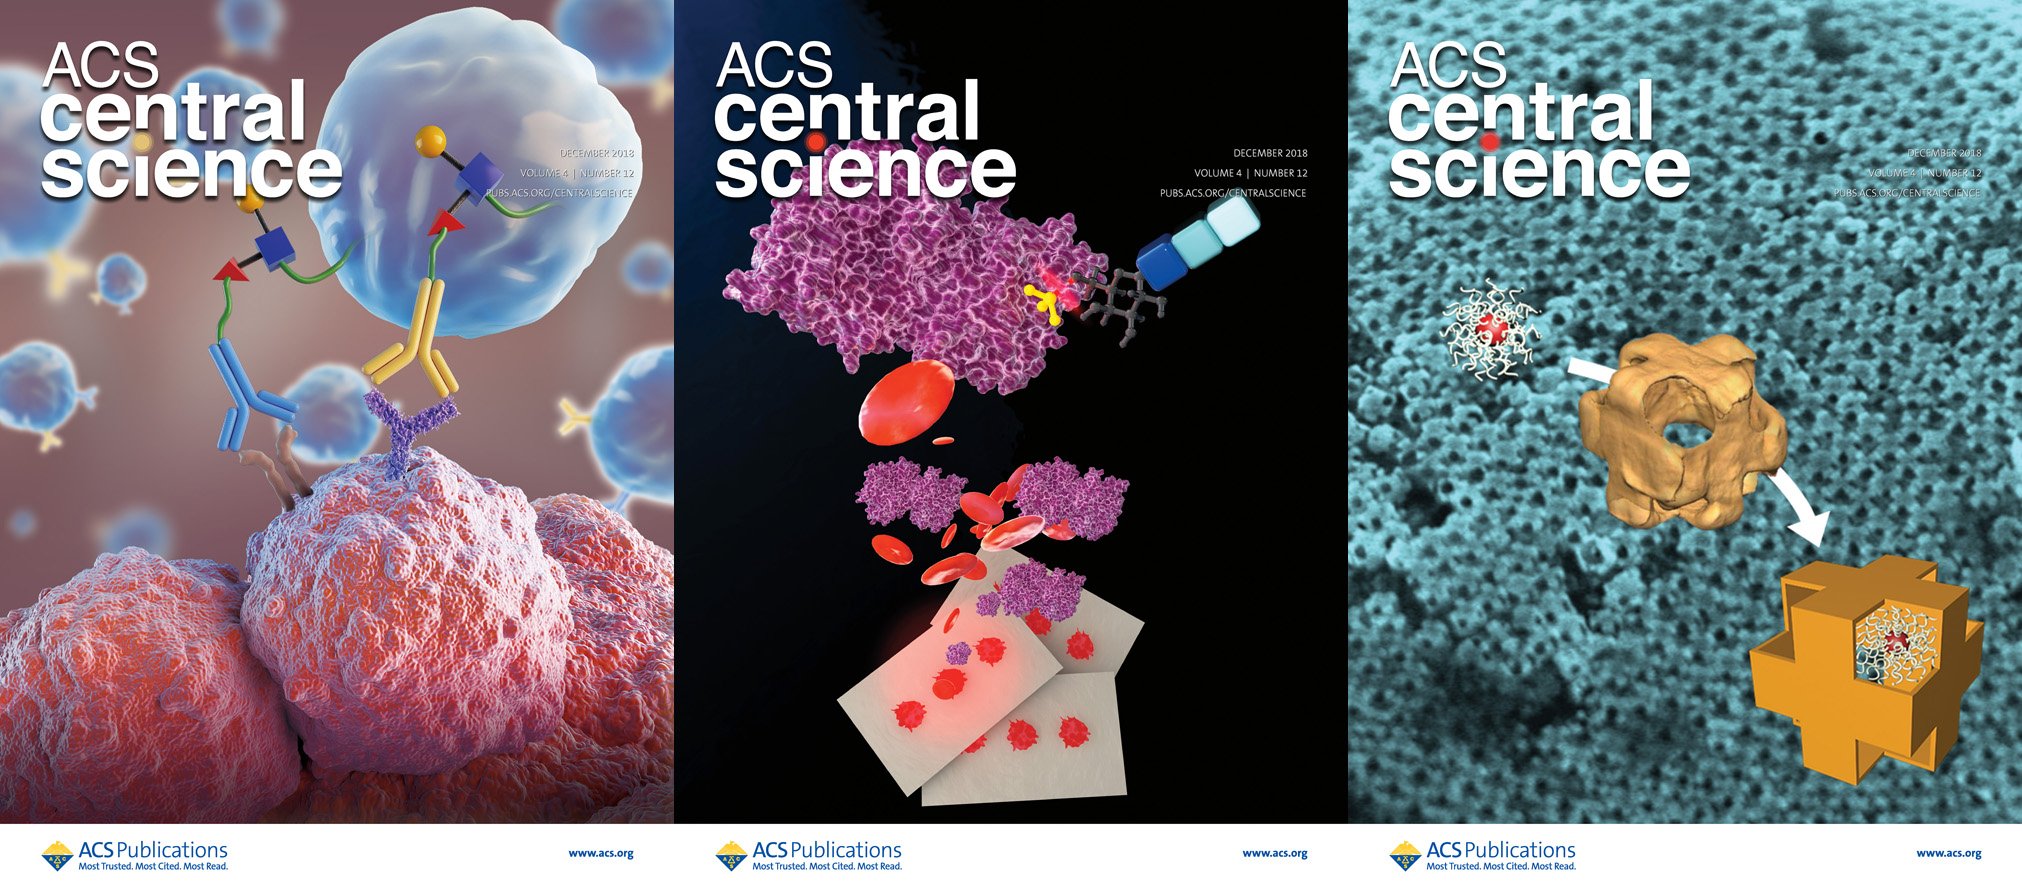 ACS Central Science on "Check out new supplementary https://t.co/vMUGmPrR6P and cover stories: https://t.co/AyJaZL6g0m by @pengwuTSRI @scrippsresearch, https://t.co/IxQKX0XMrq by Hannes Mikula @tuvienna https://t.co/BleB3NxSSu by ...